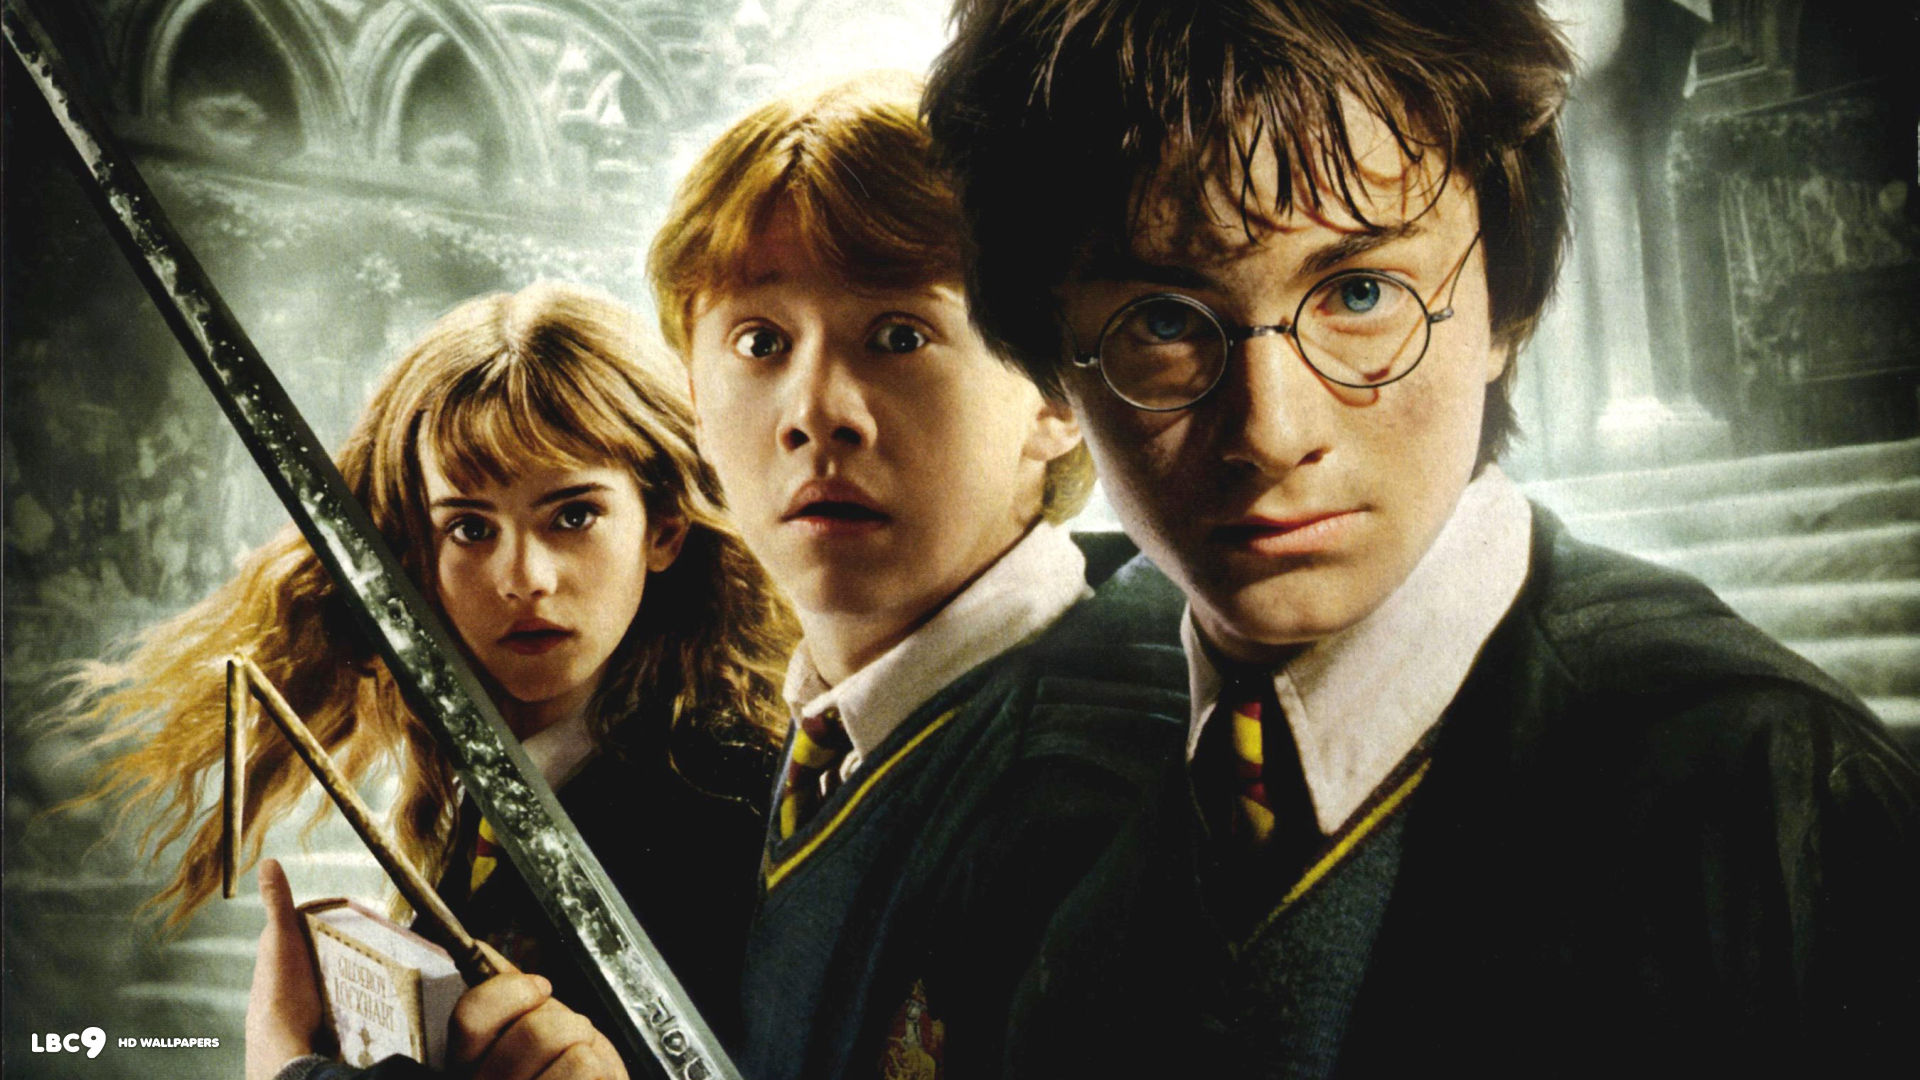 Harry potter and the chamber of secrets wallpaper